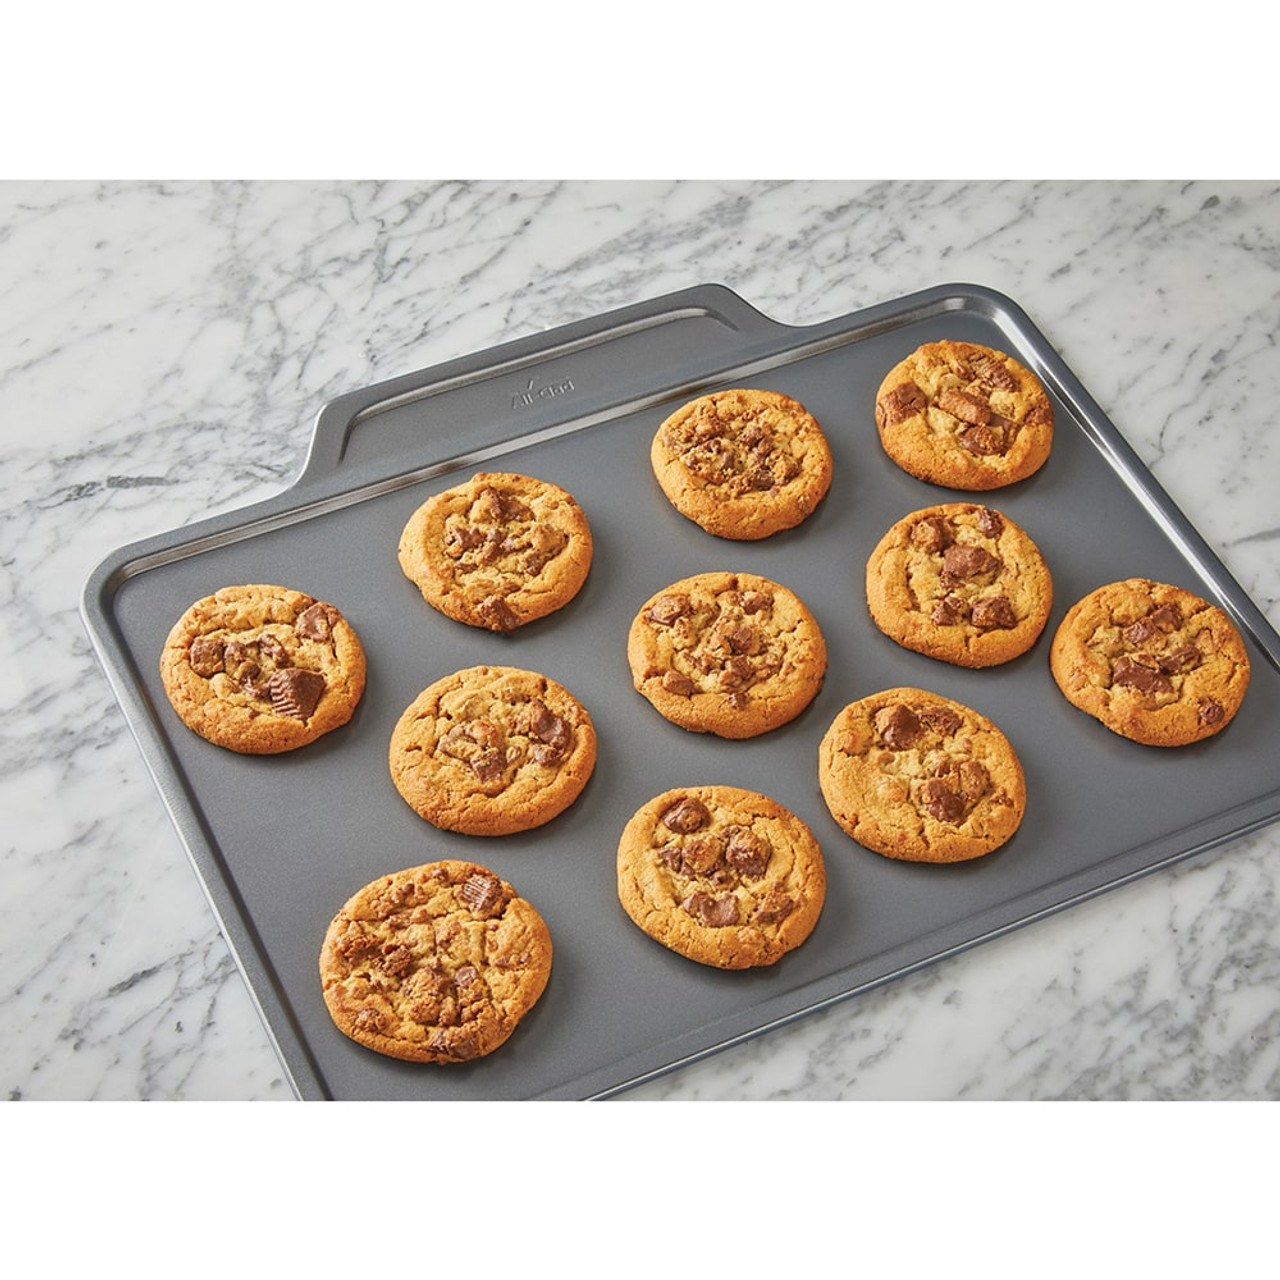 https://cdn11.bigcommerce.com/s-hccytny0od/images/stencil/1280x1280/products/3281/11742/all-clad-pro-release-cookie-sheet-1__47671.1589500643.jpg?c=2?imbypass=on